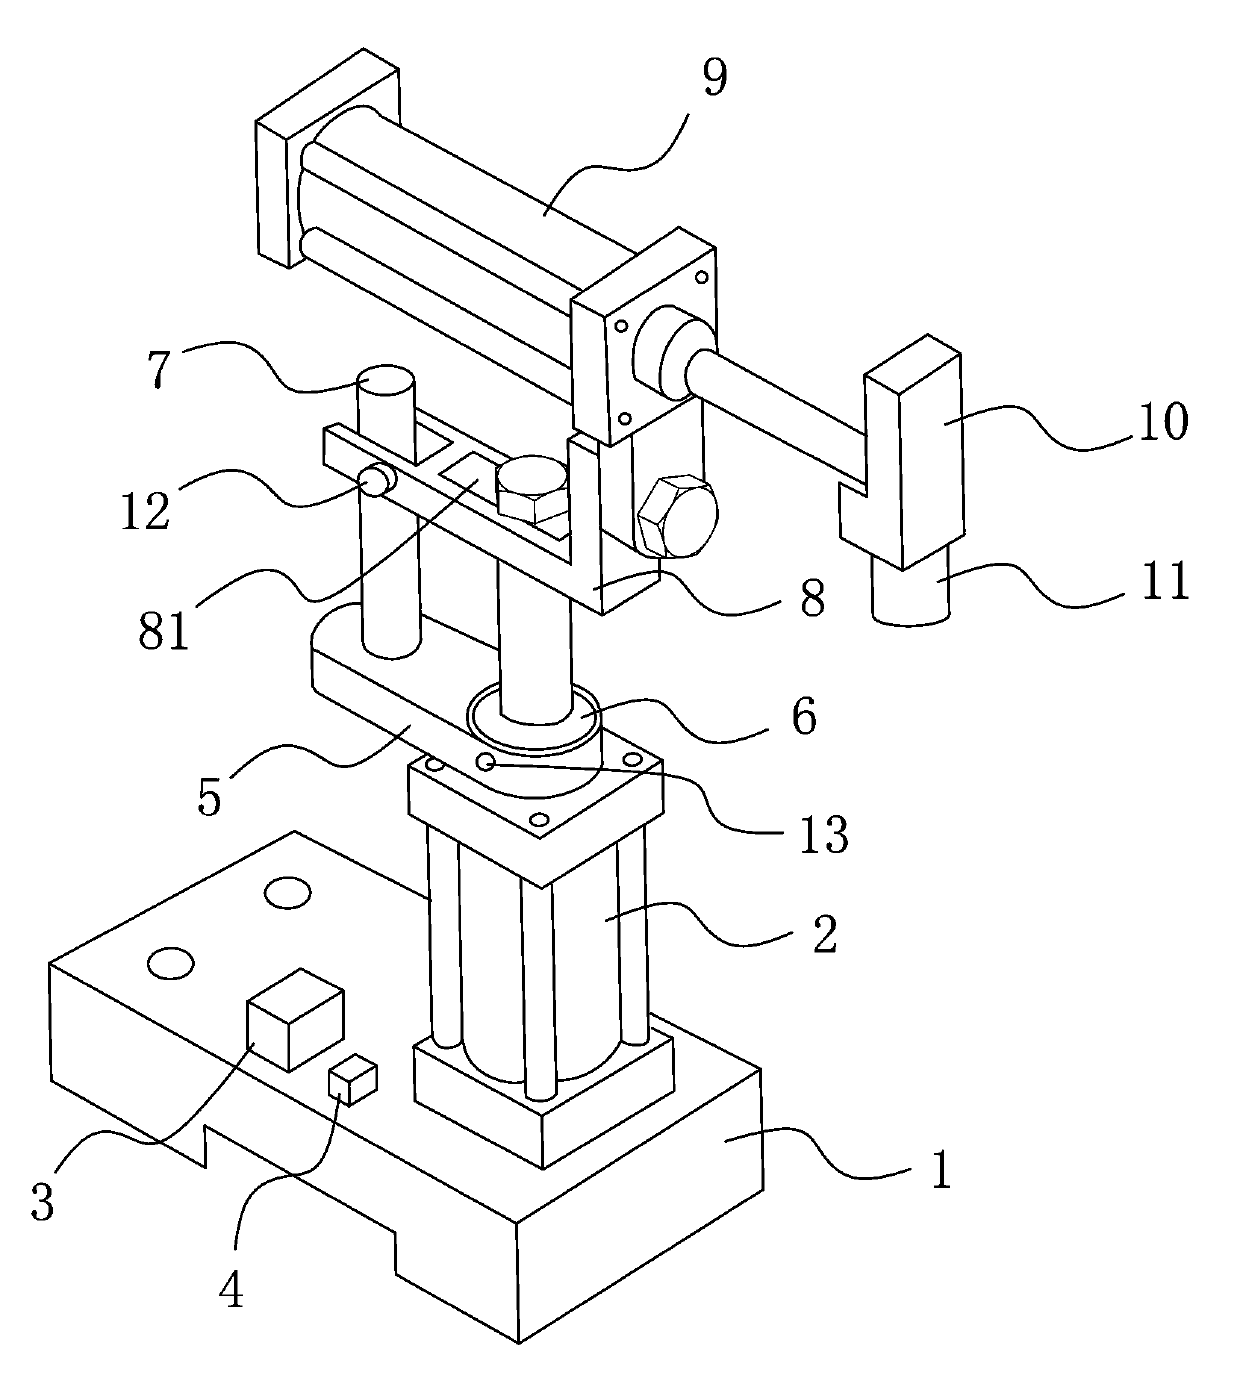 Magnetic attracting type mechanical arm with adjustable positions